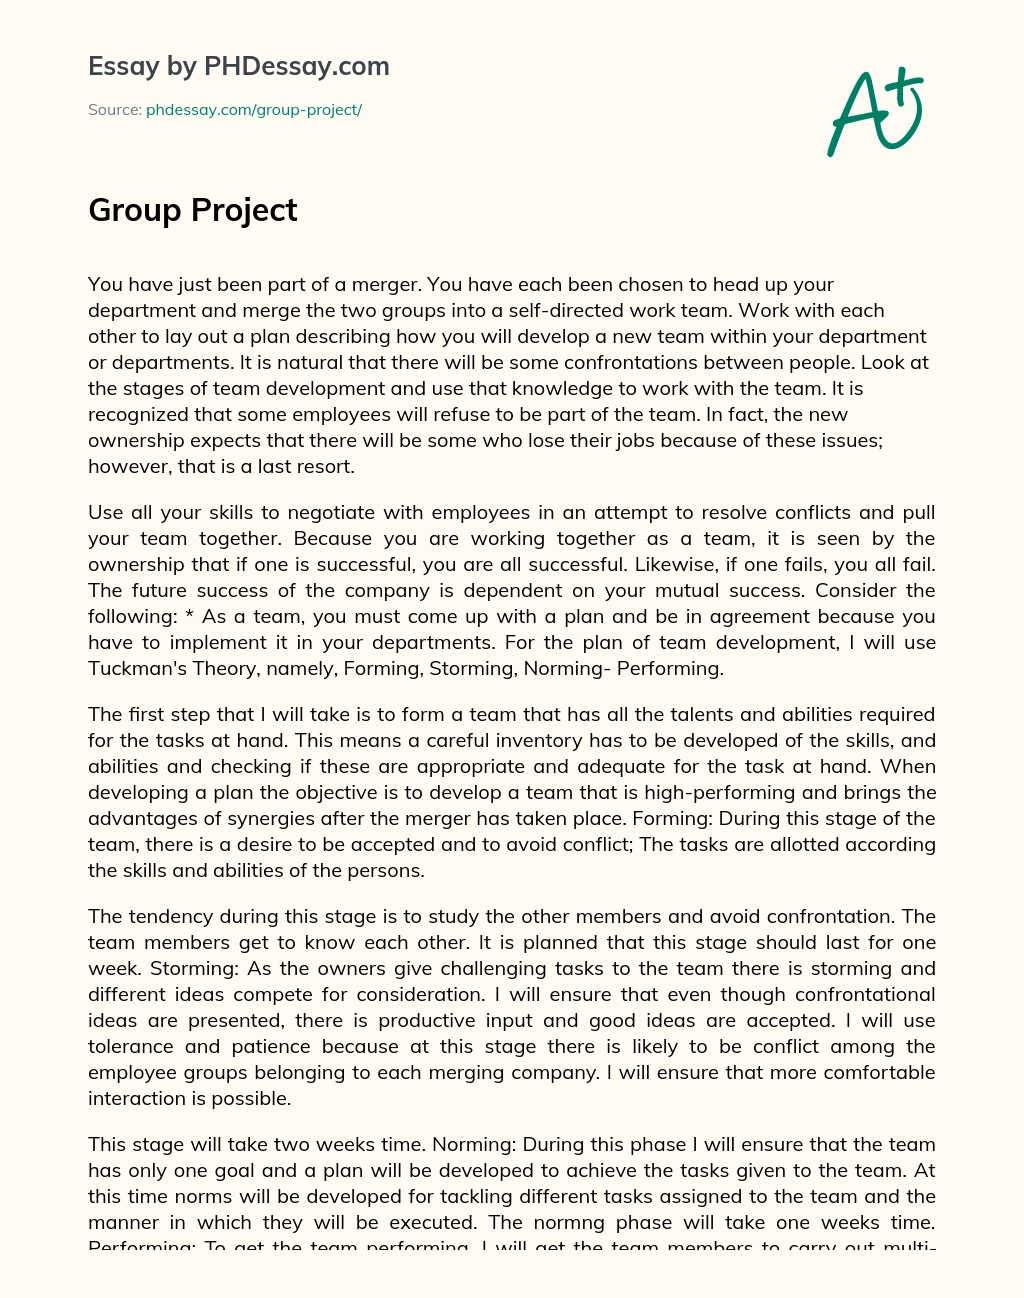 Group Project essay